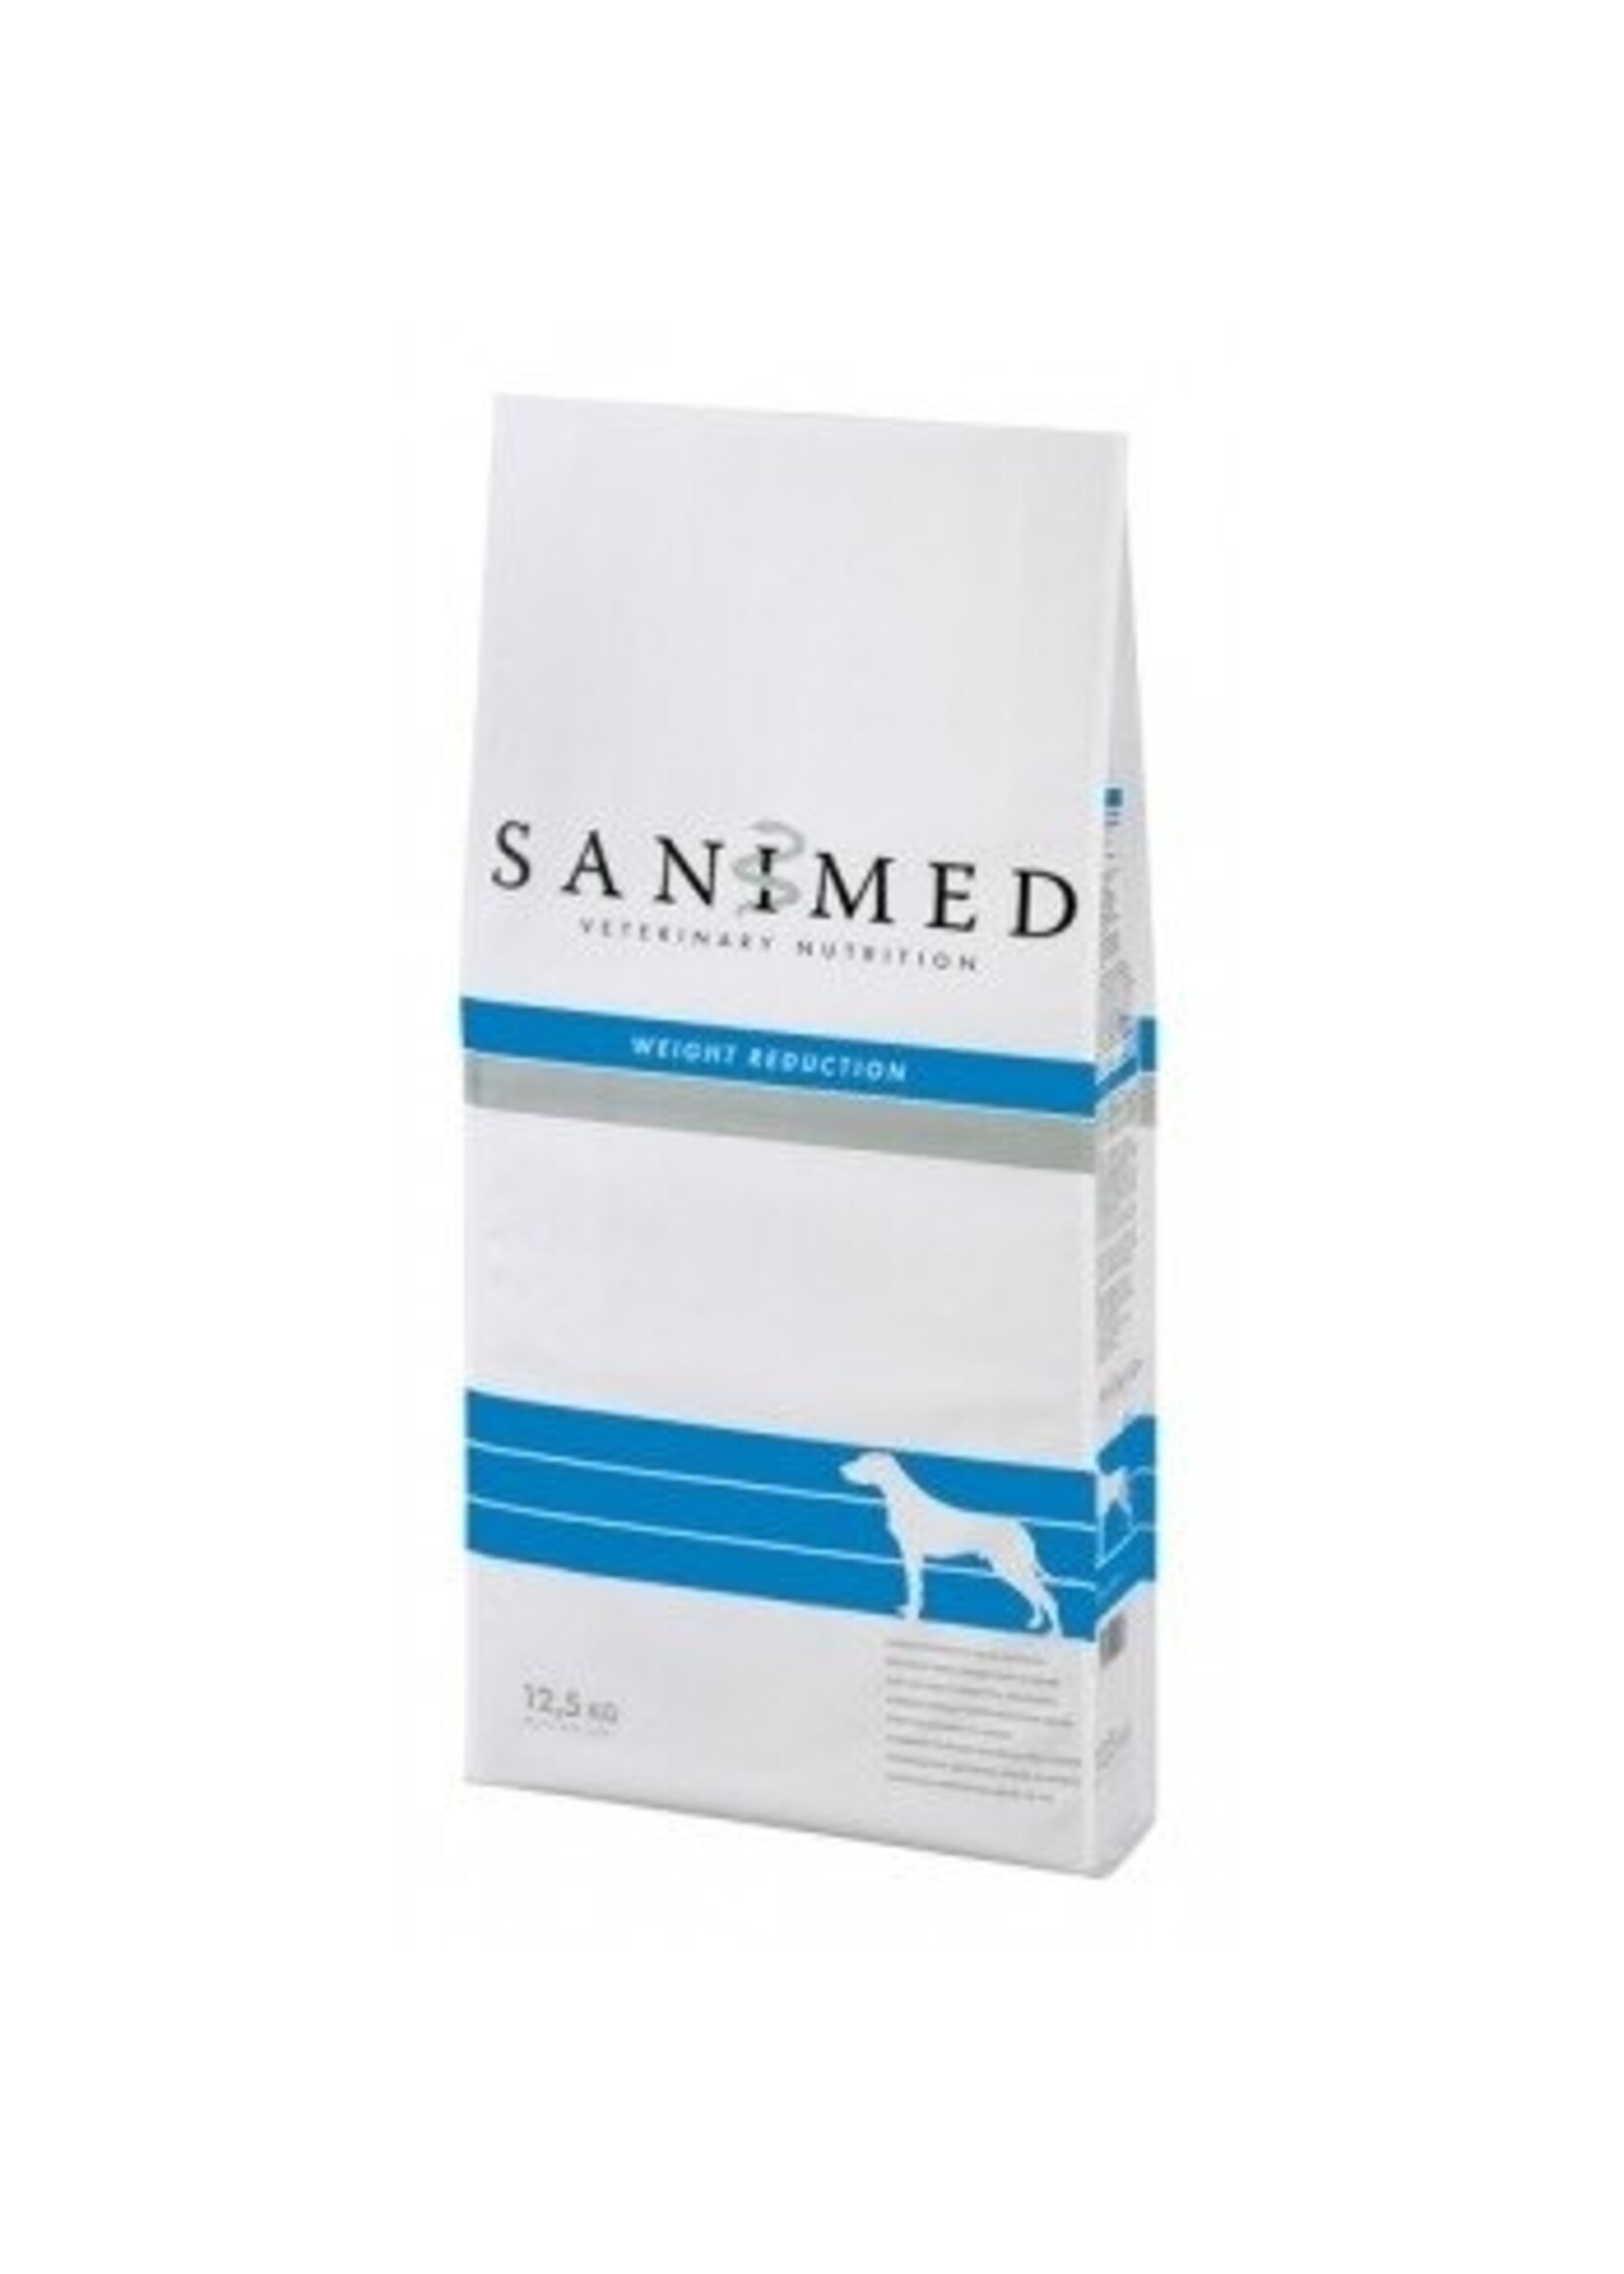 Sanimed Sanimed Weight Reduction Chien12,5kg